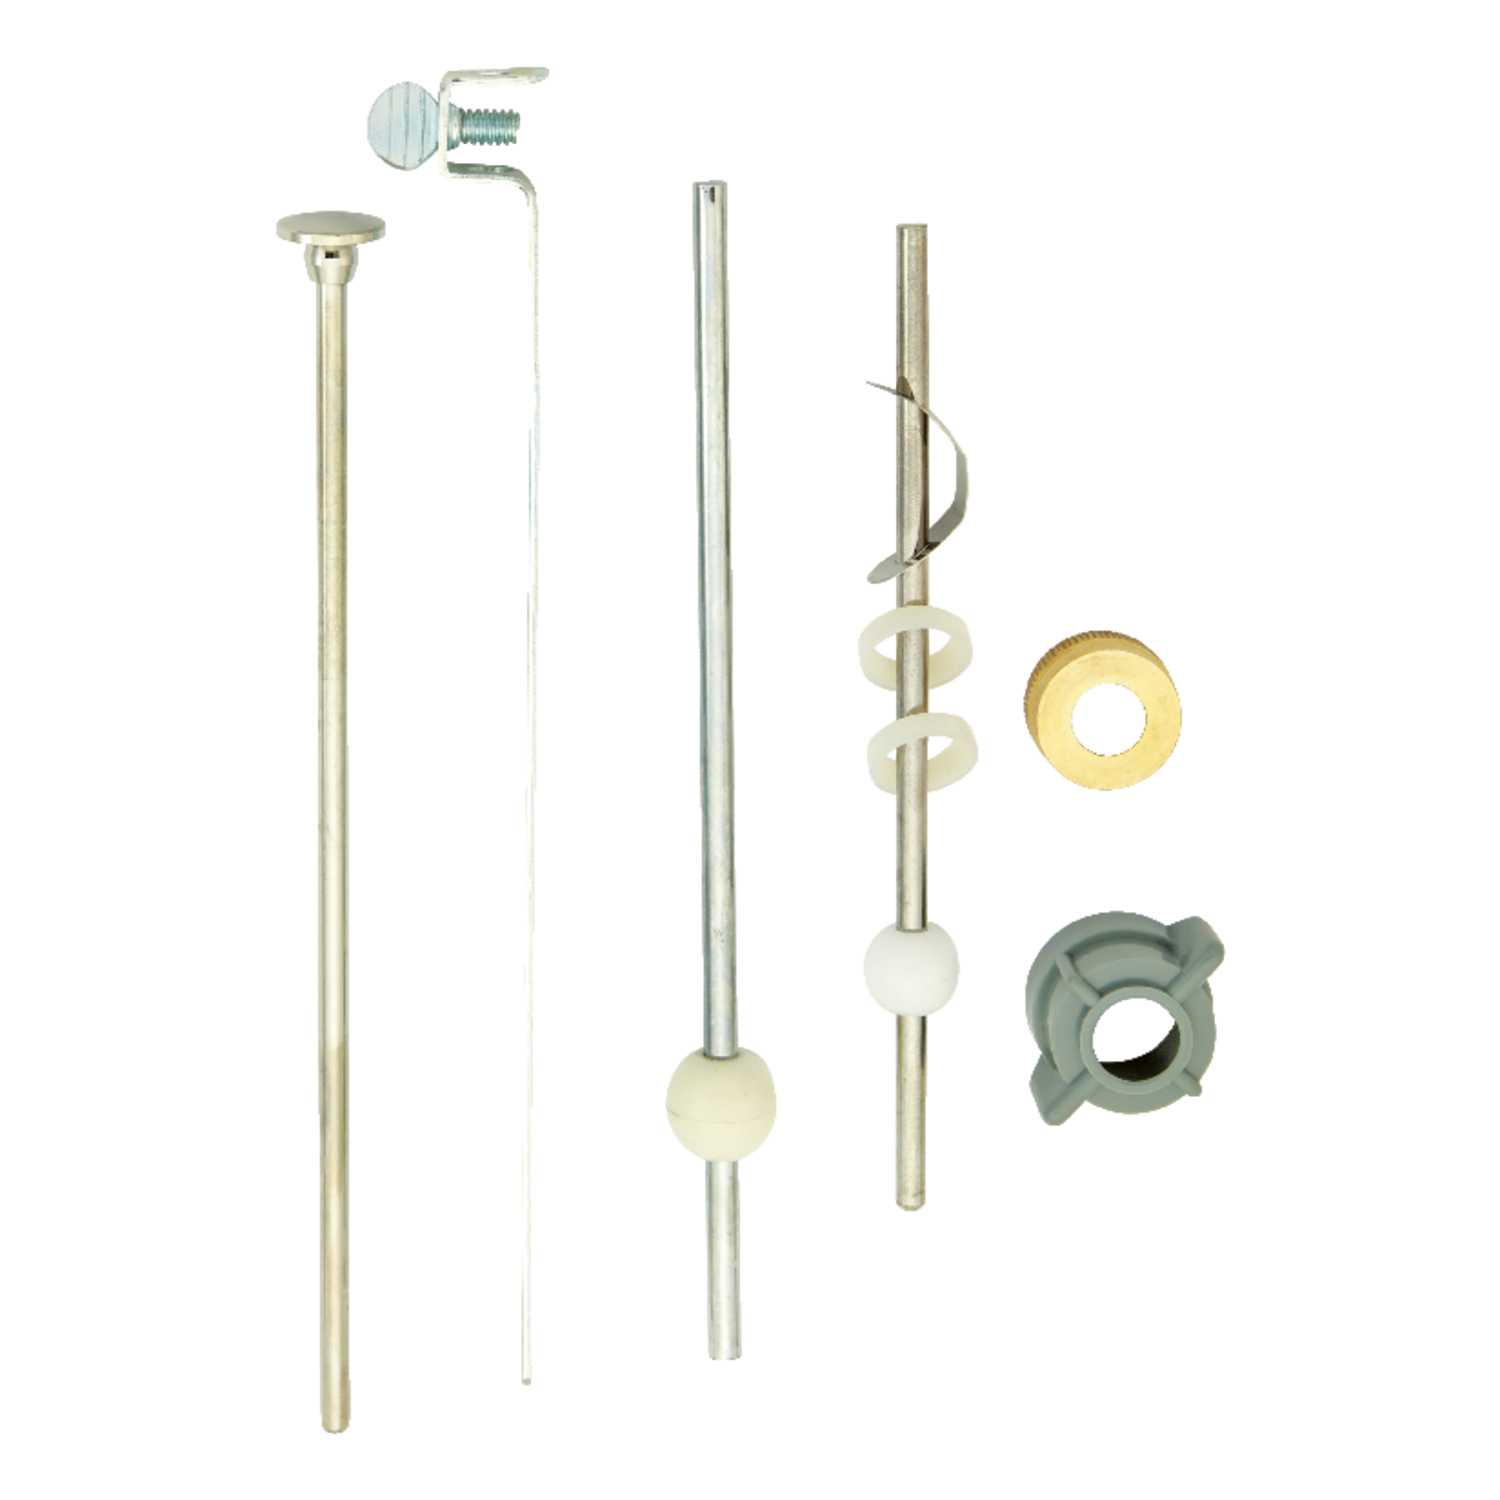  Ace  N A Dia Chrome Nickel Sink  Drain  Rod and Strap Ace  